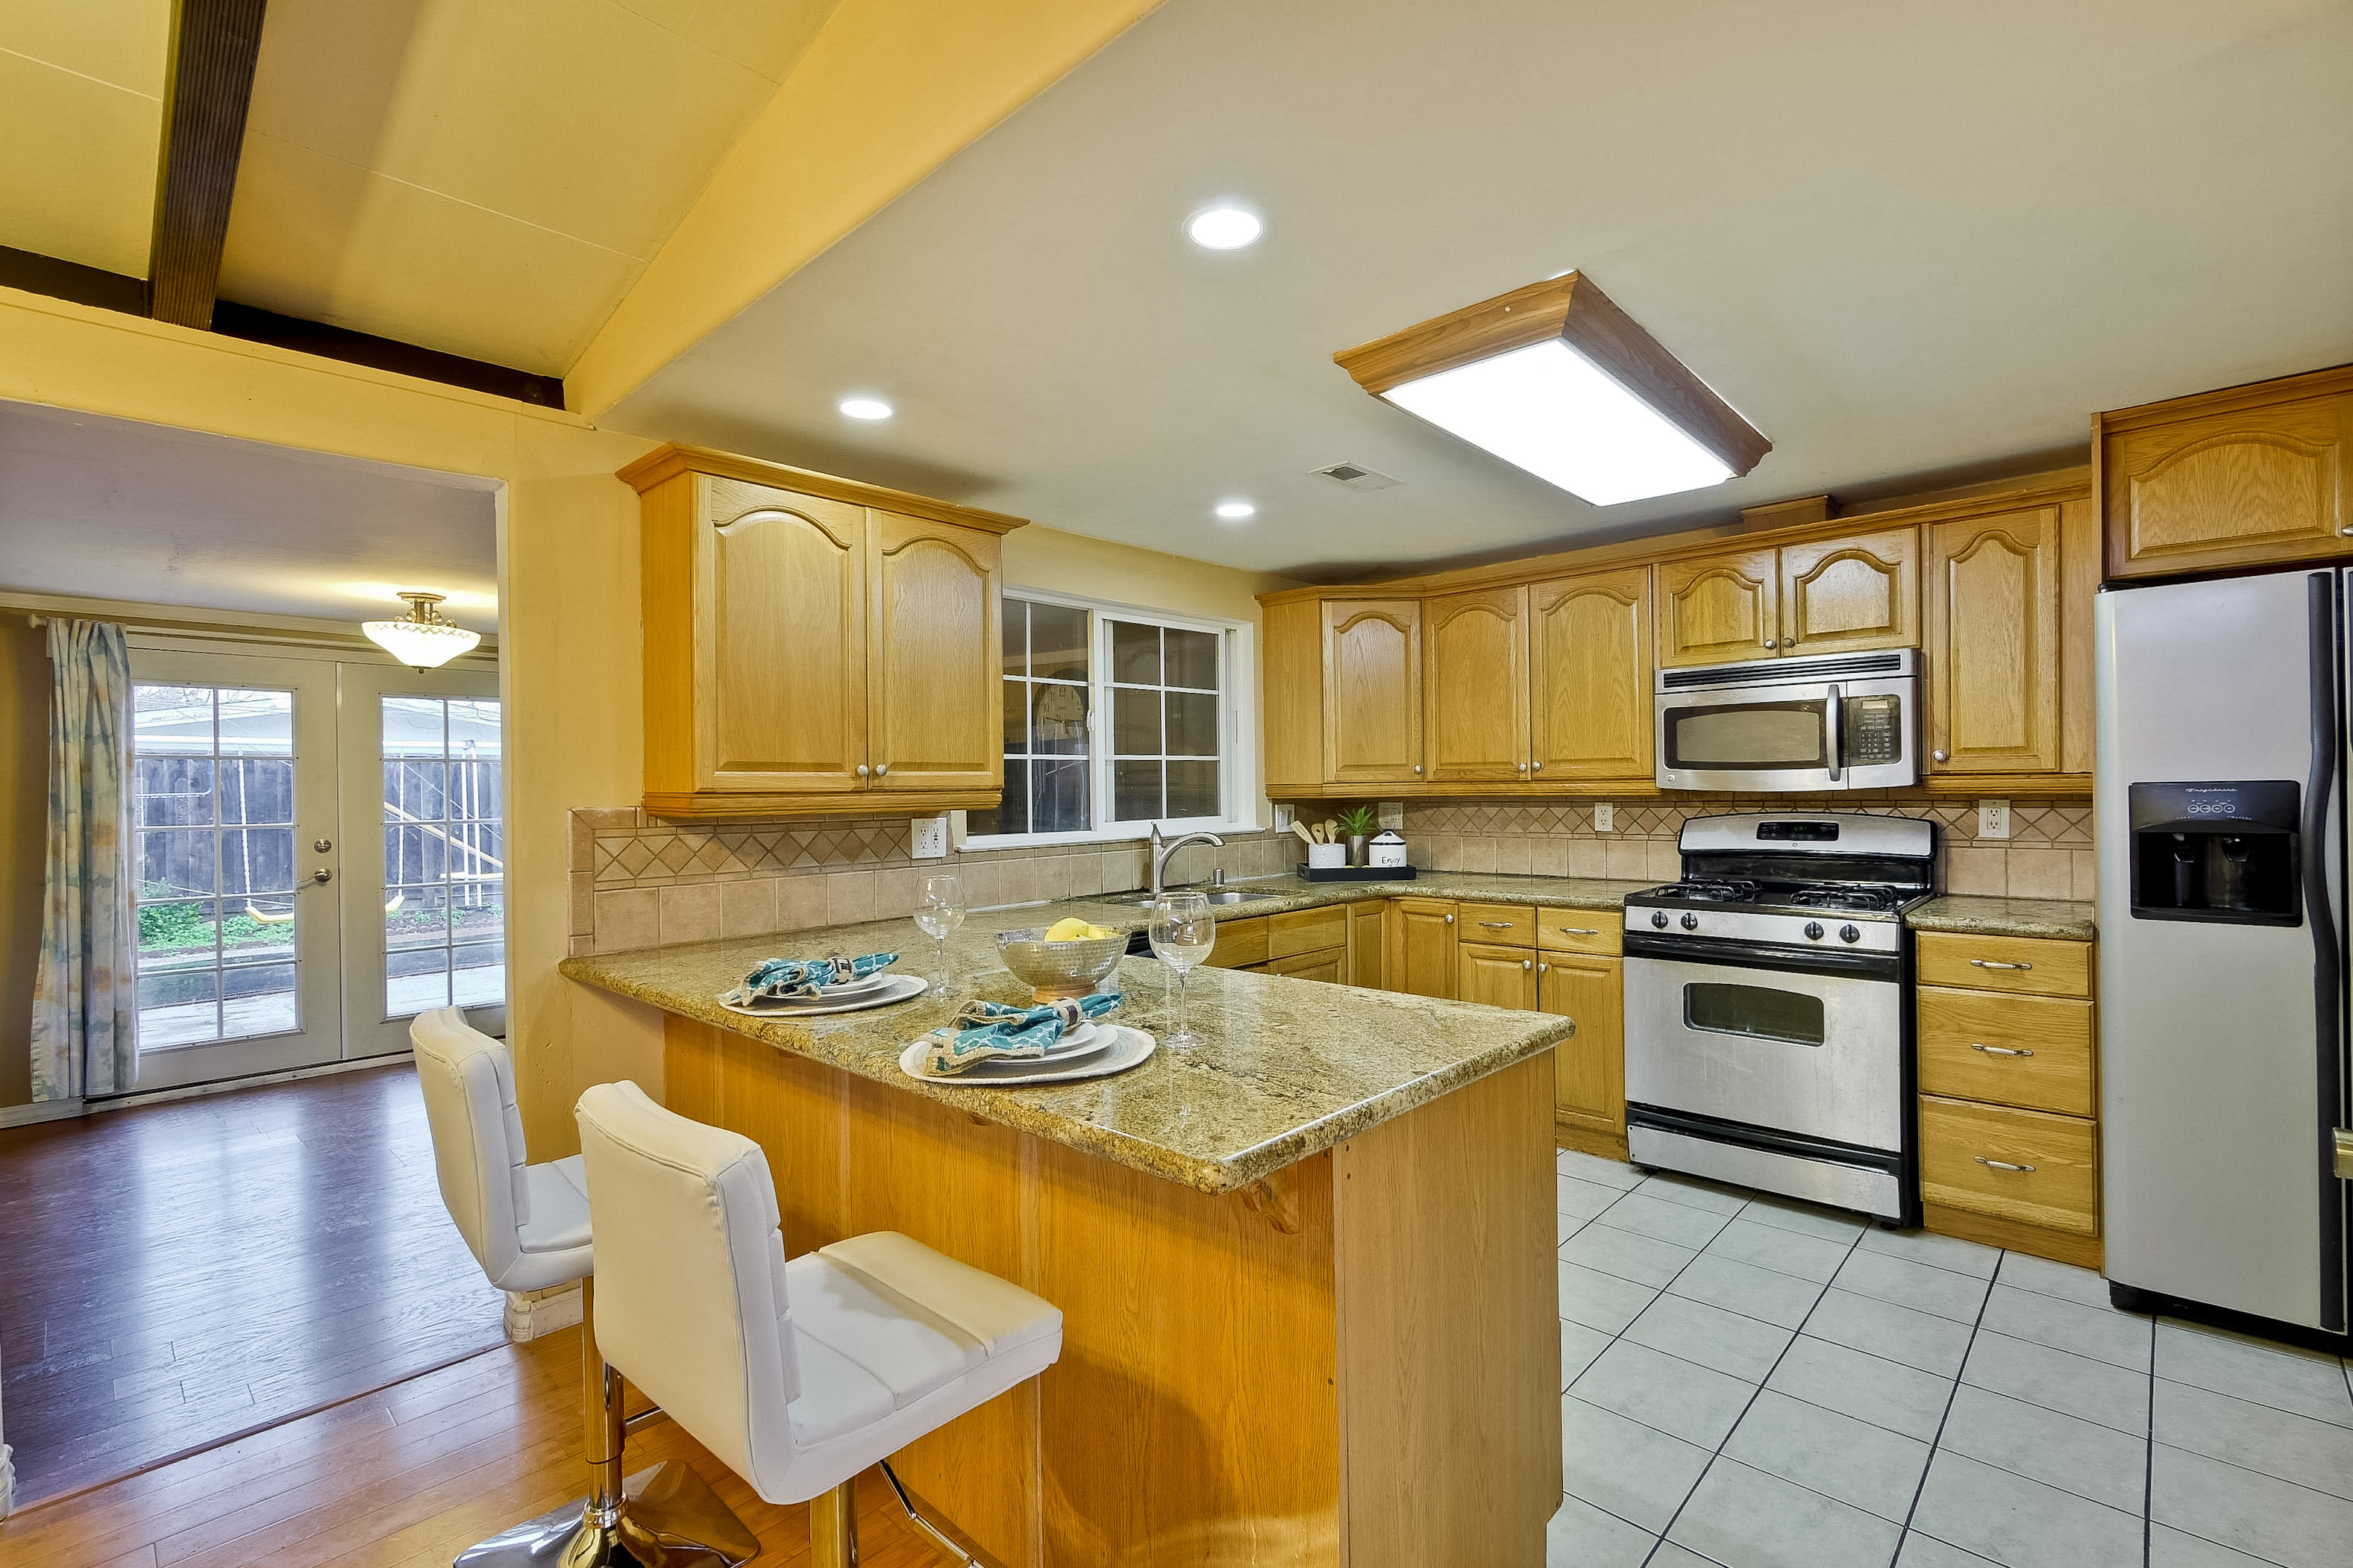 315 Meadowlake Dr, Sunnyvale 94089 - Kitchen (A)